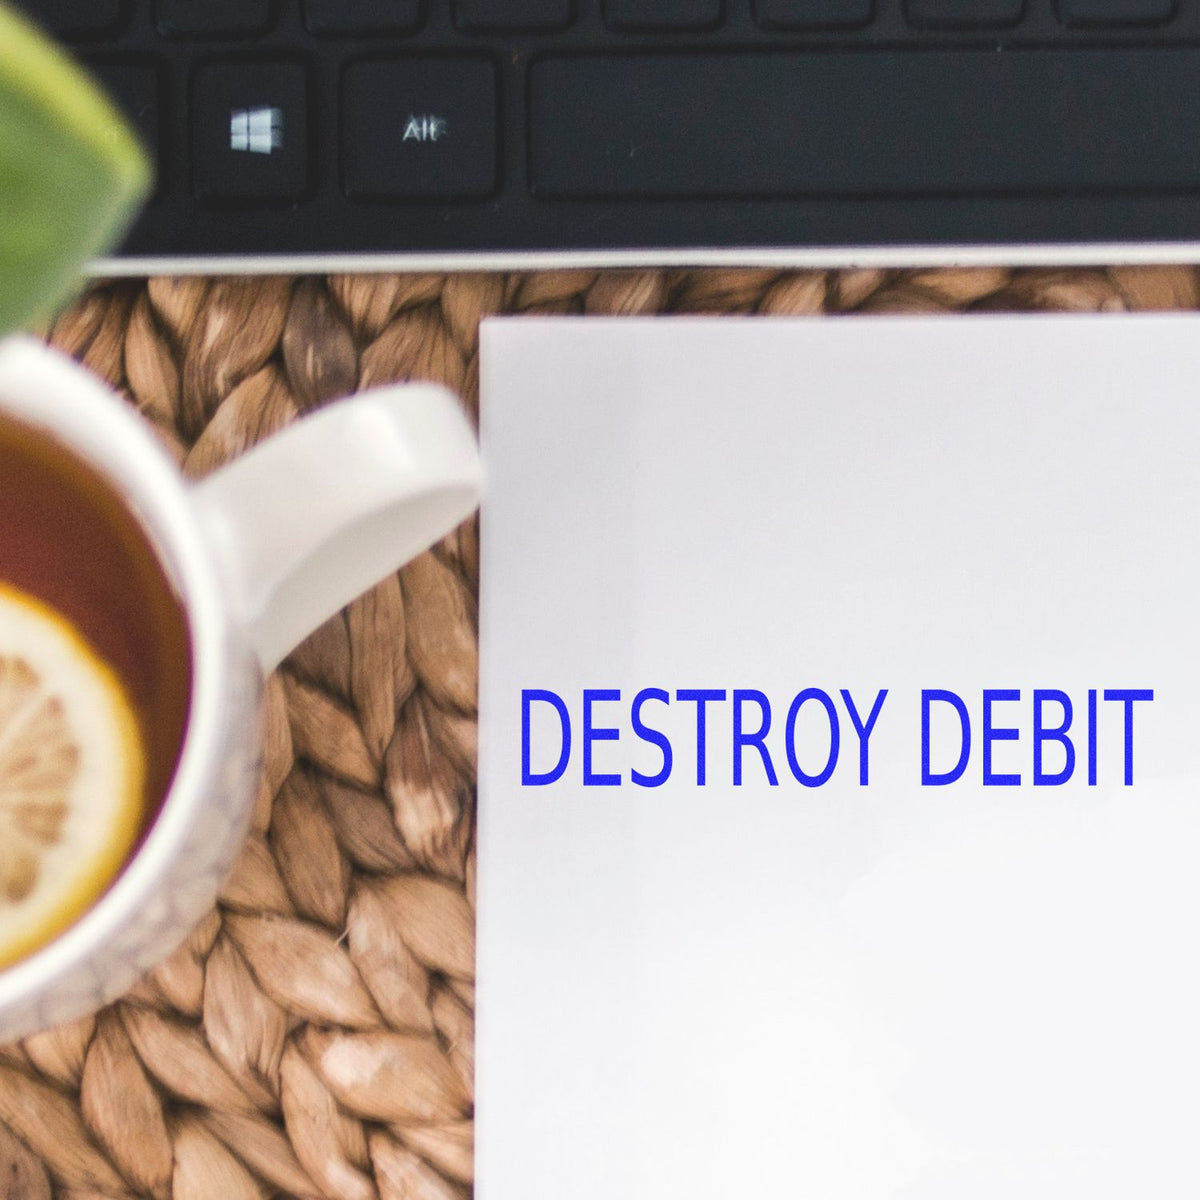 Destroy Debit Rubber Stamp In Use Photo